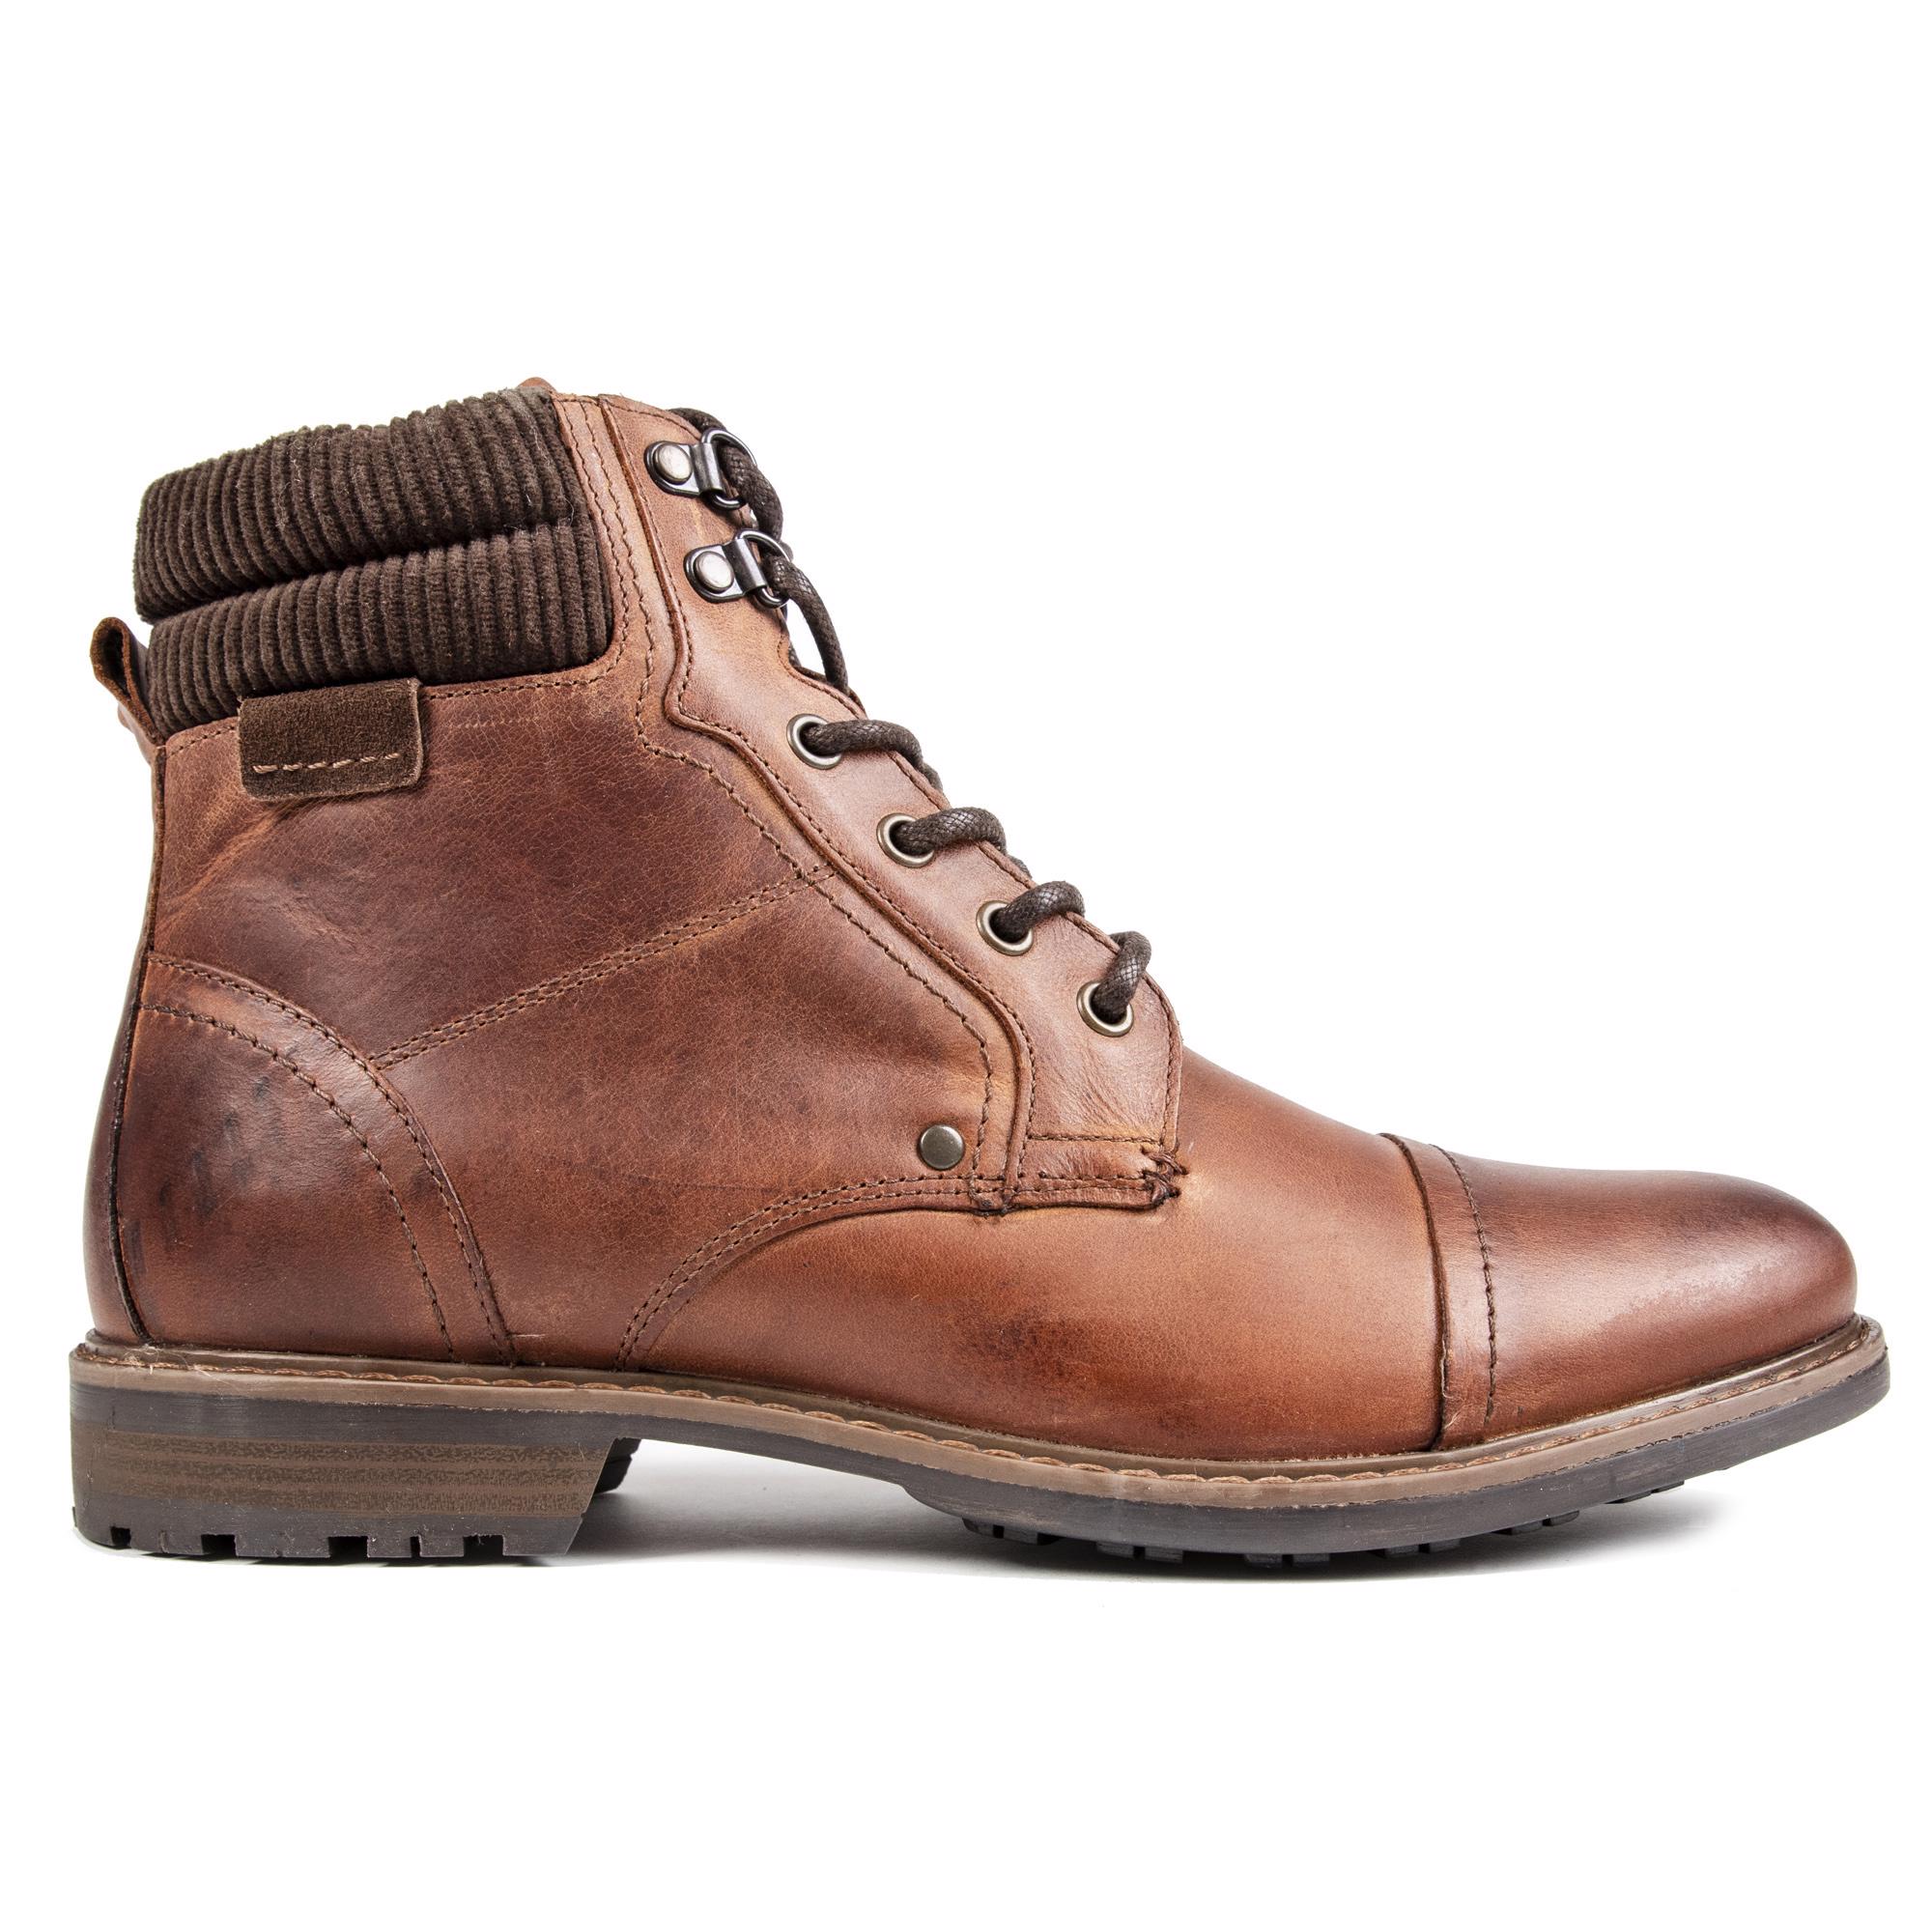 Uitwerpselen Andrew Halliday vallei Cheap Mens Brown Thomas Crick Hardy Boots | Soletrader Outlet